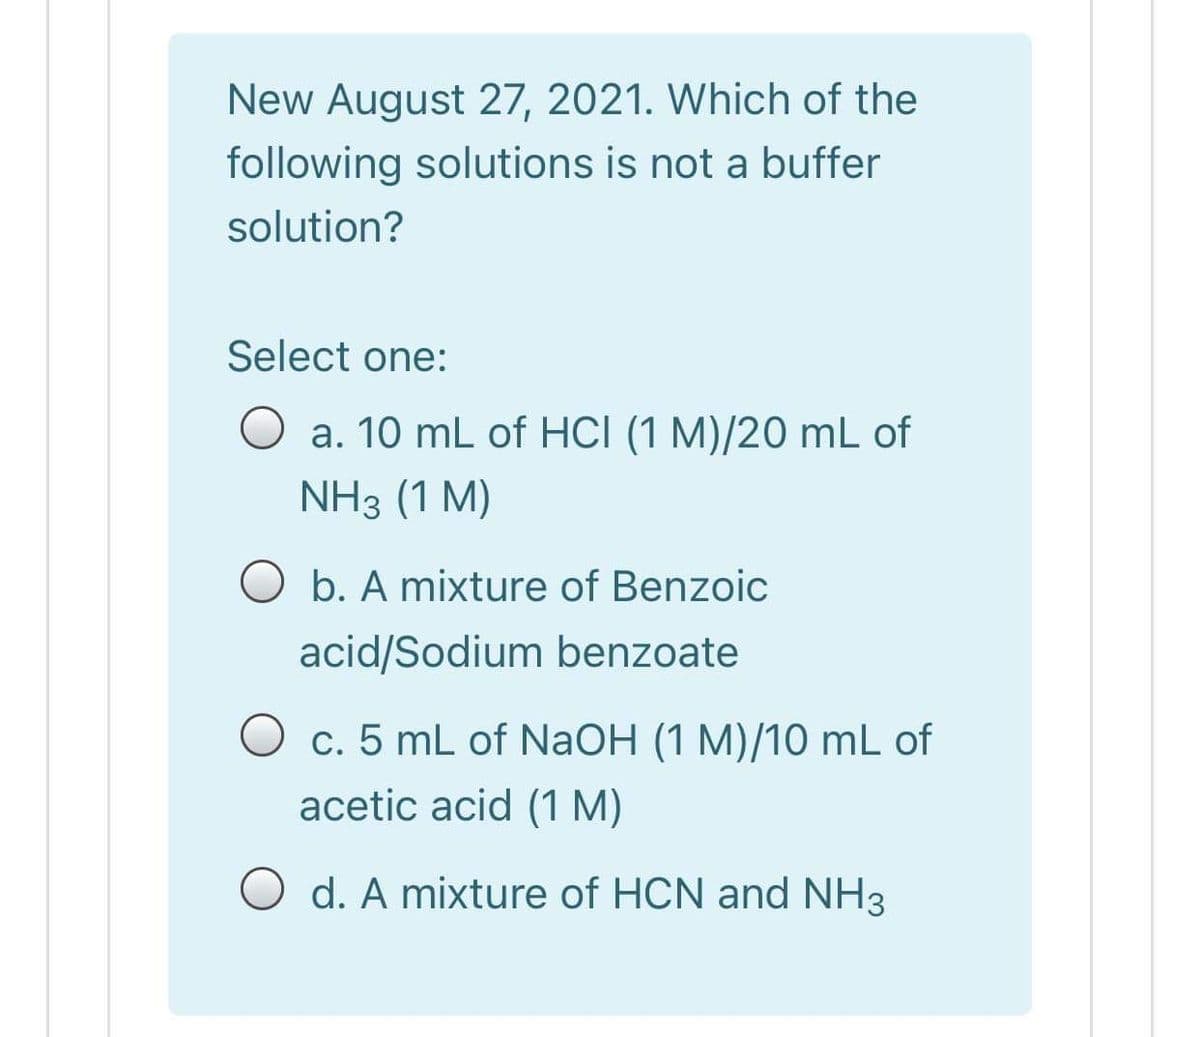 New August 27, 2021. Which of the
following solutions is not a buffer
solution?
Select one:
a. 10 mL of HCI (1 M)/20 mL of
NH3 (1 M)
O b. A mixture of Benzoic
acid/Sodium benzoate
O c. 5 mL of NaOH (1 M)/10 mL of
acetic acid (1 M)
O d. A mixture of HCN and NH3
